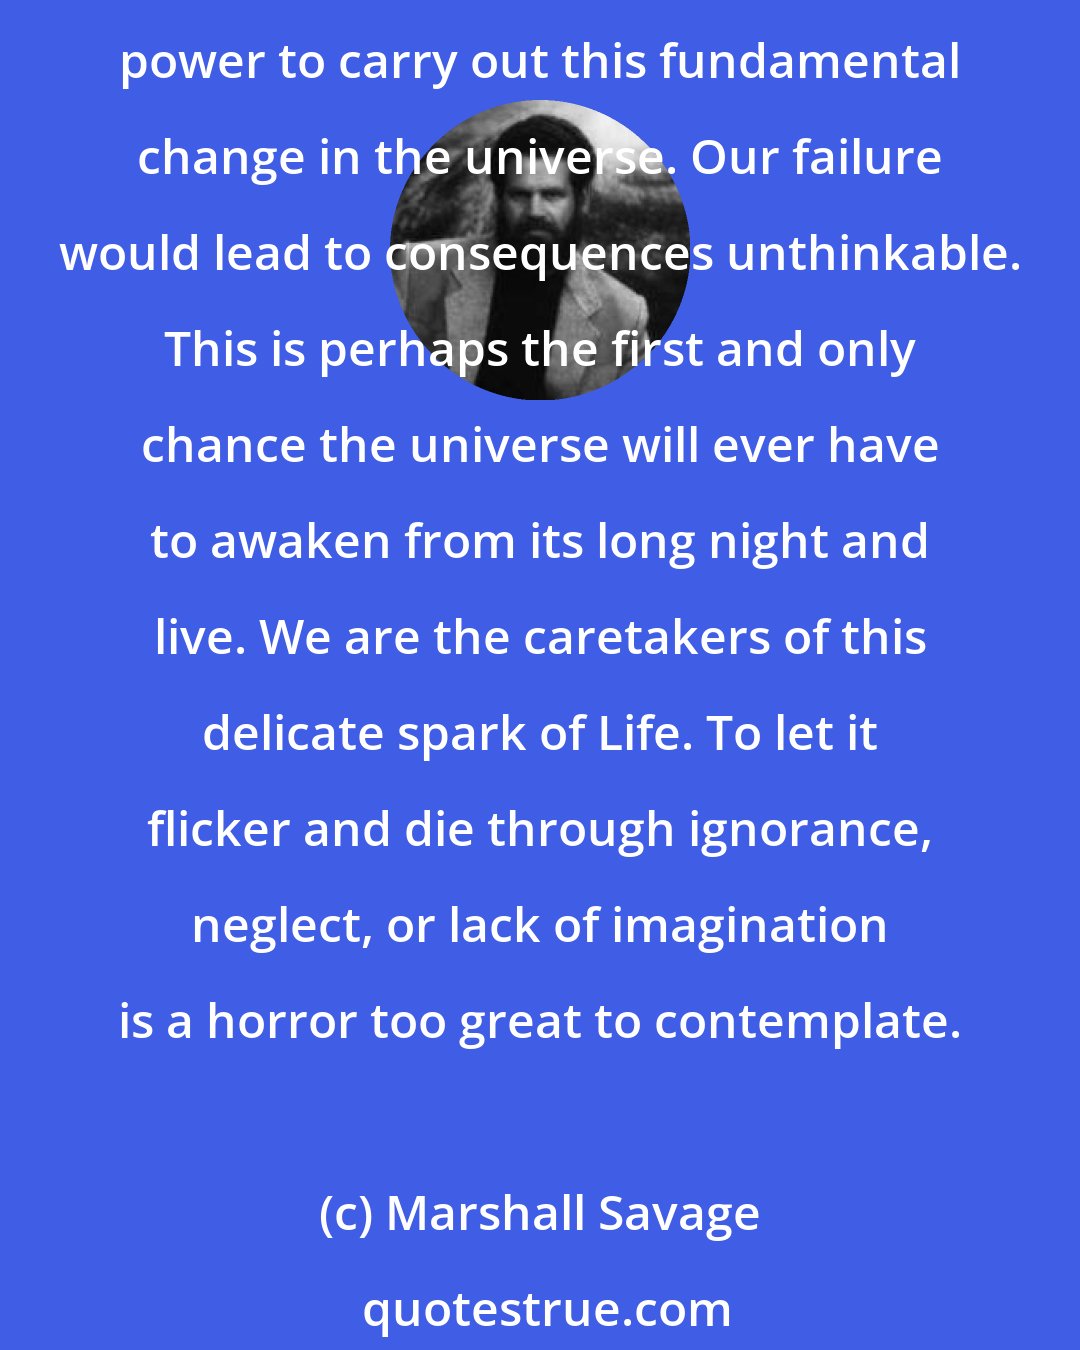 Marshall Savage: If we deny our awesome challenge; turn our backs on the living universe, and forsake our cosmic destiny, we will commit a crime of unutterable magnitude. Mankind alone has the power to carry out this fundamental change in the universe. Our failure would lead to consequences unthinkable. This is perhaps the first and only chance the universe will ever have to awaken from its long night and live. We are the caretakers of this delicate spark of Life. To let it flicker and die through ignorance, neglect, or lack of imagination is a horror too great to contemplate.